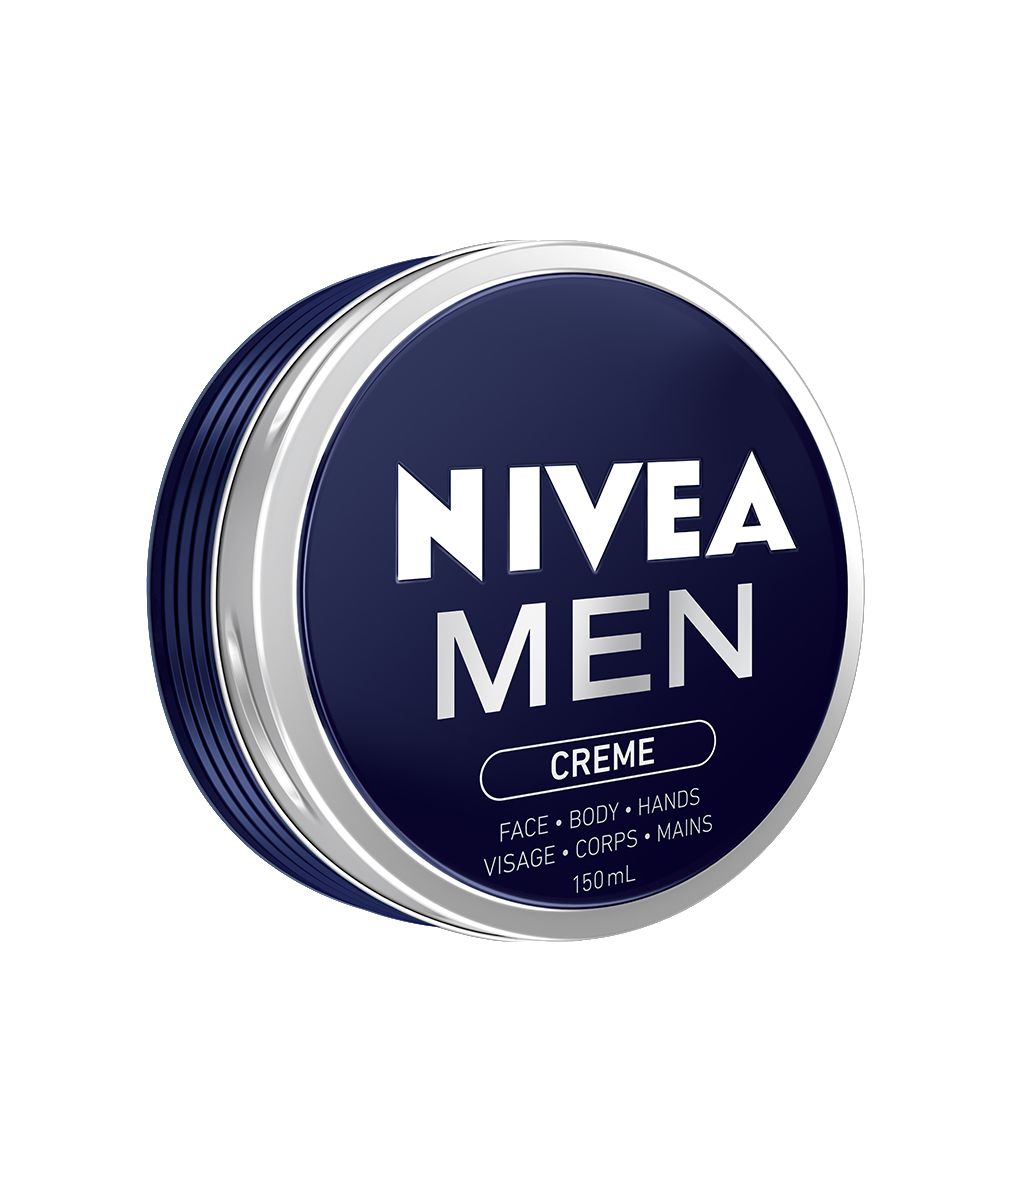 I used the $1 Nivea Creme on my face, and here's what - Geeky Posh